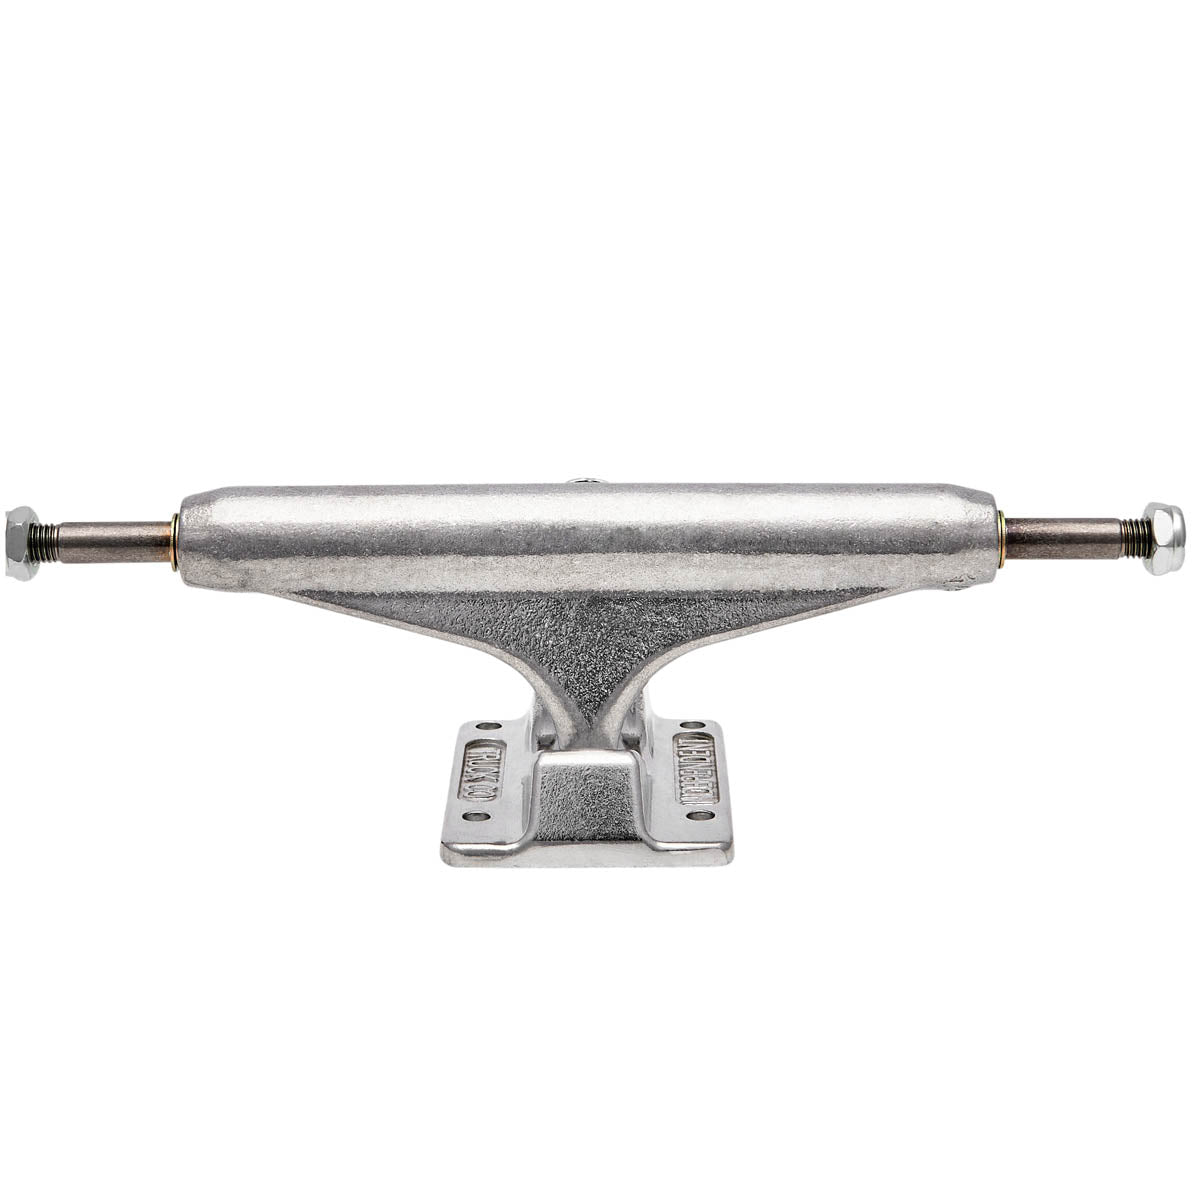 Independent Stage 11 Forged Titanium Skateboard Trucks - Silver image 4